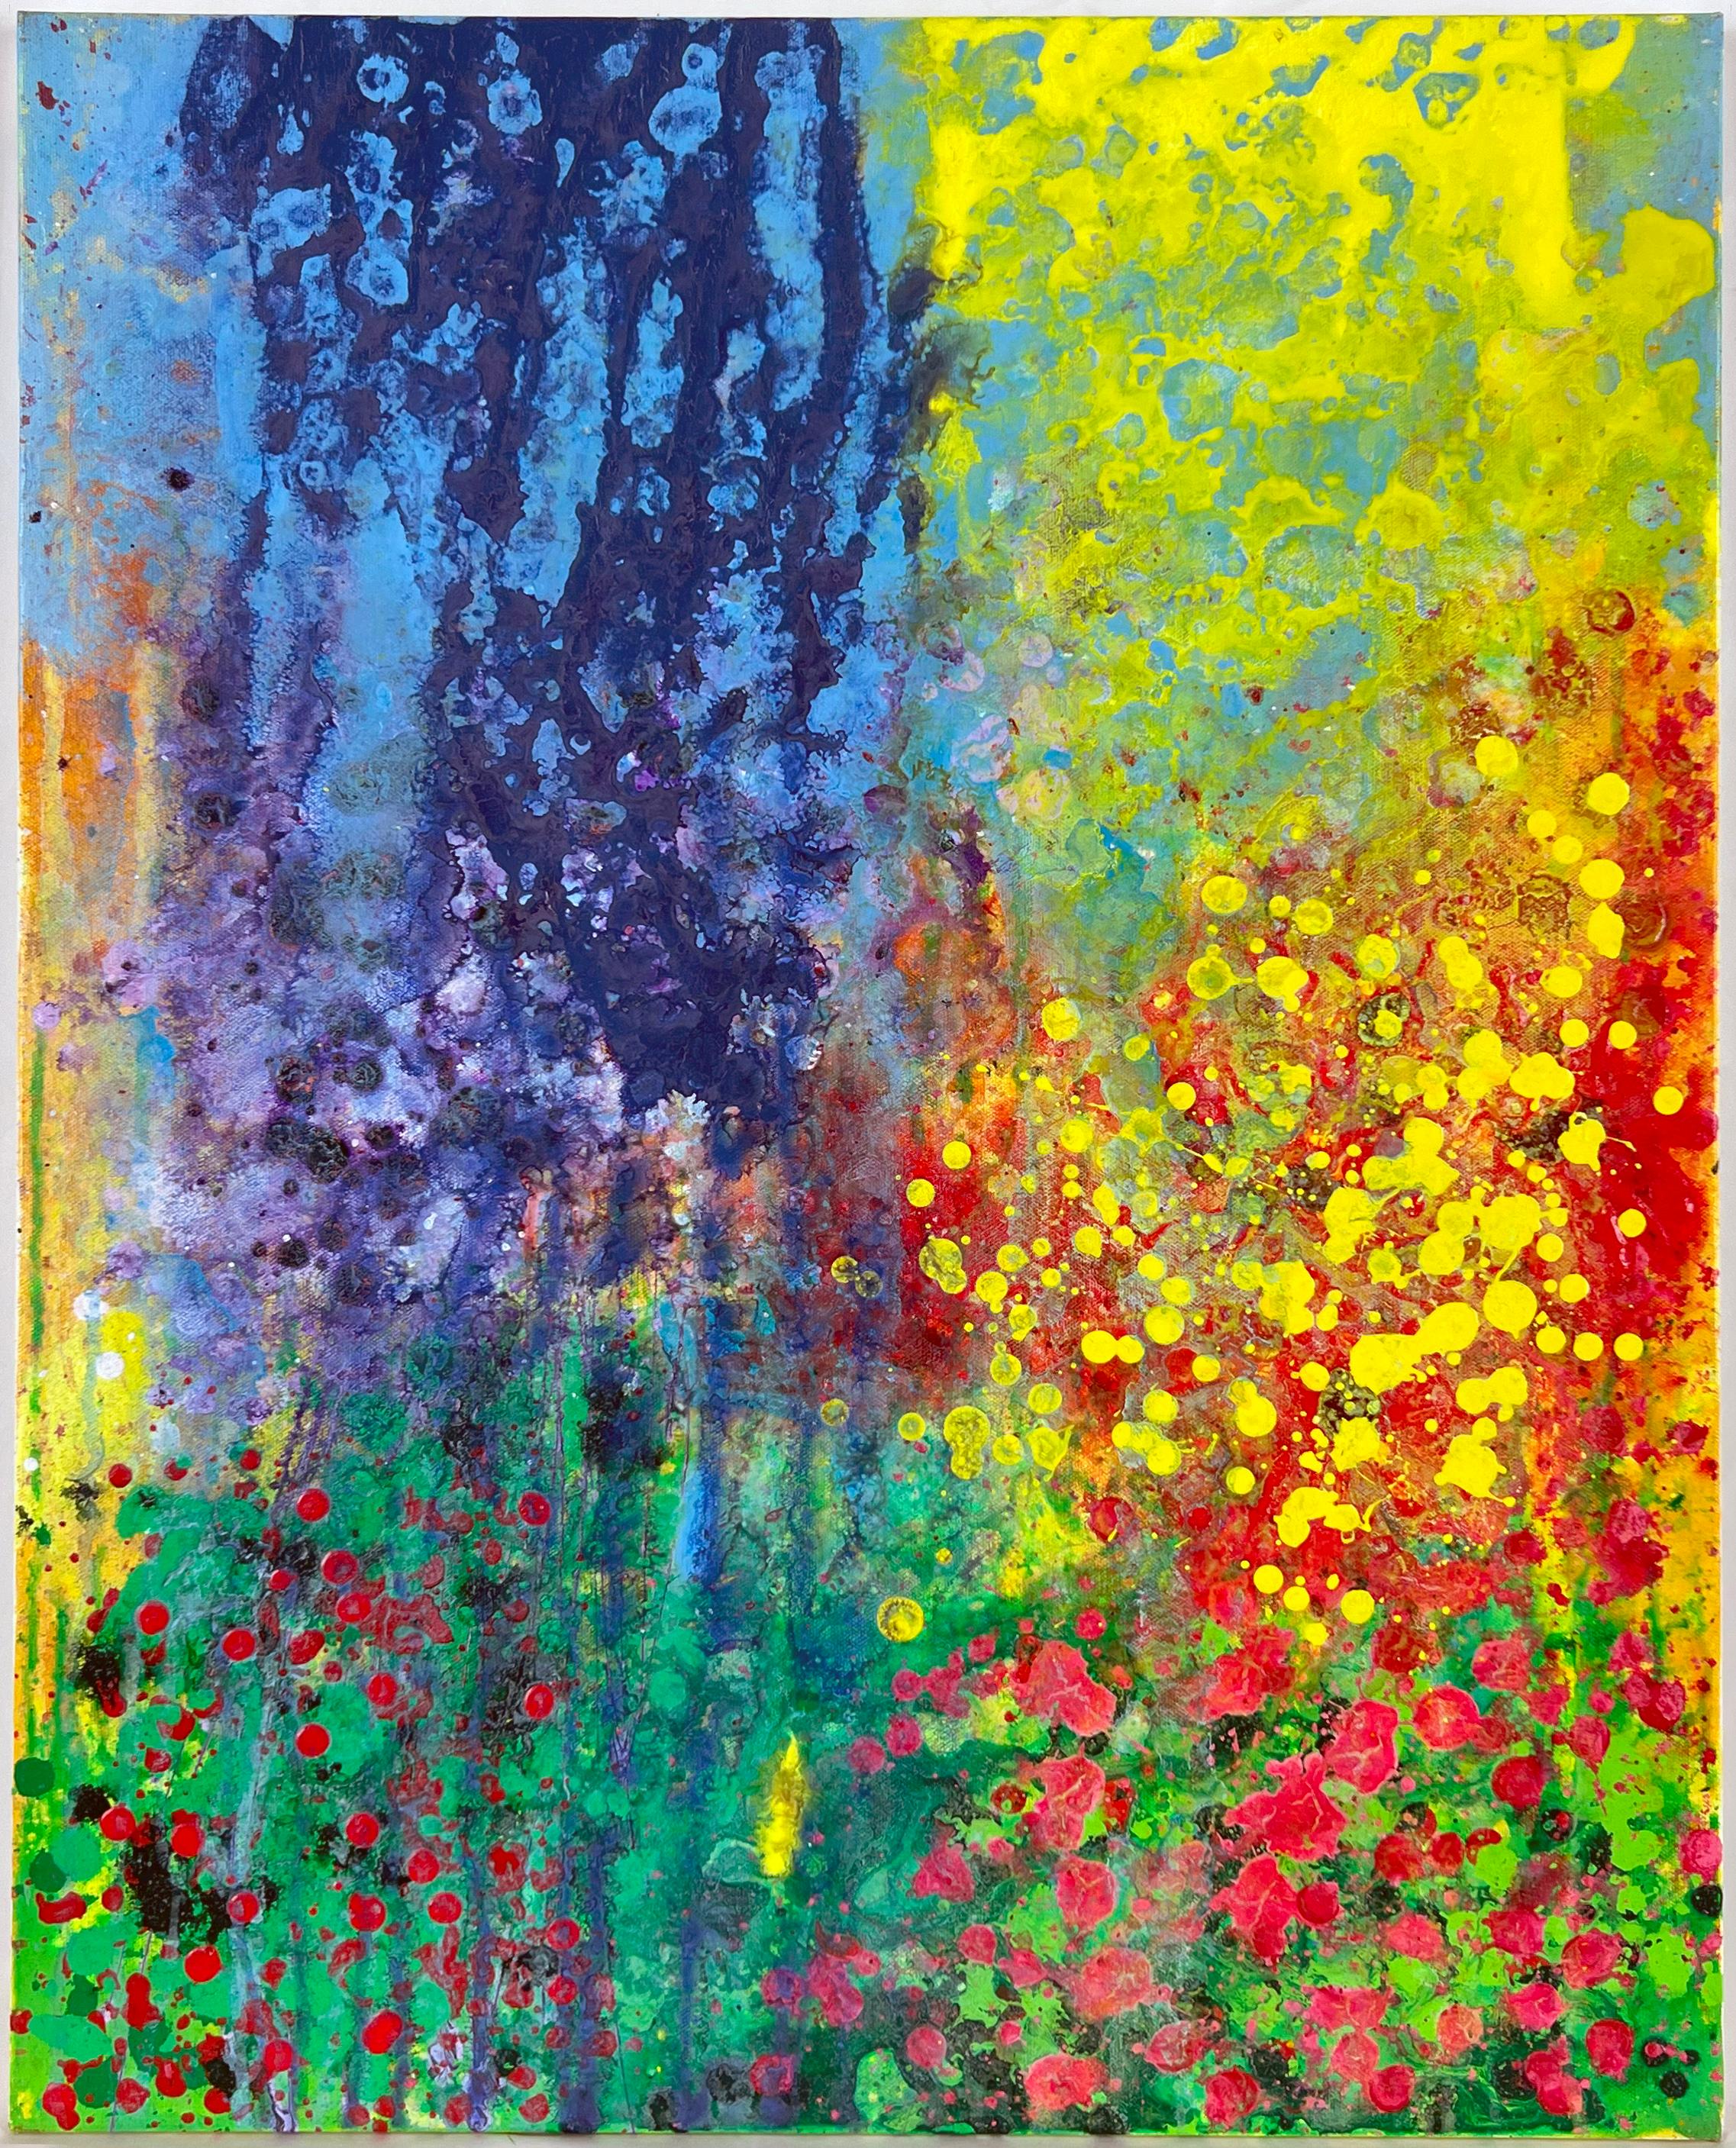 "Garden Series #4" - Abstract Expressionist Composition in Acrylic on Canvas